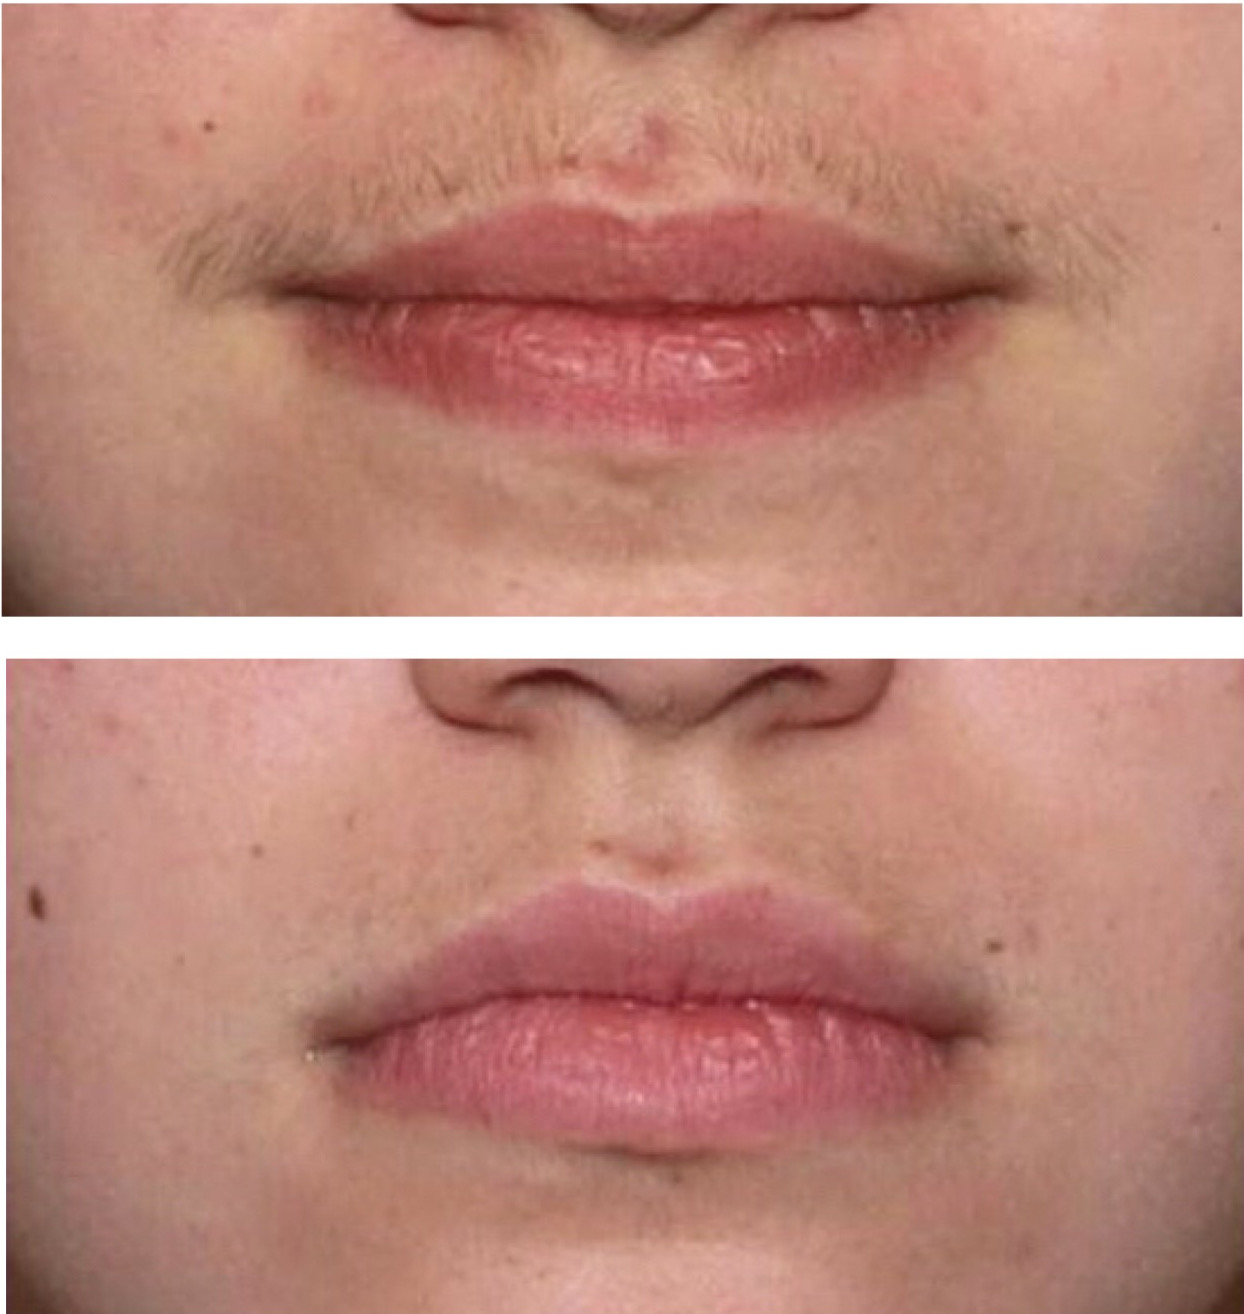 Women facial hair removal insurance coverage